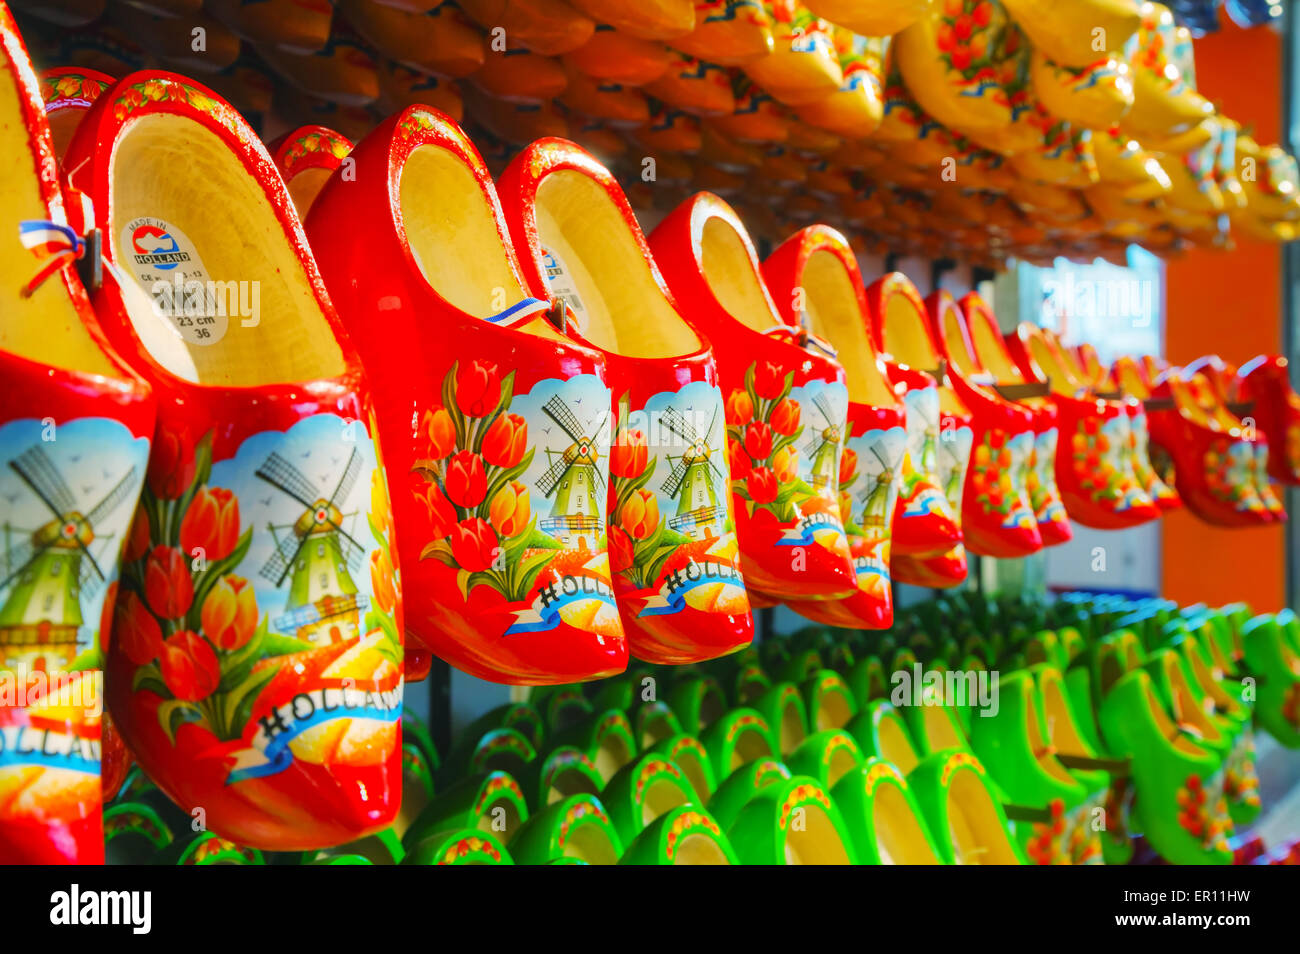 AMSTERDAM - APRIL 16: Colourful traditional Dutch wooden shoes (klomps) on April 16, 2015 in Amsterdam. Stock Photo